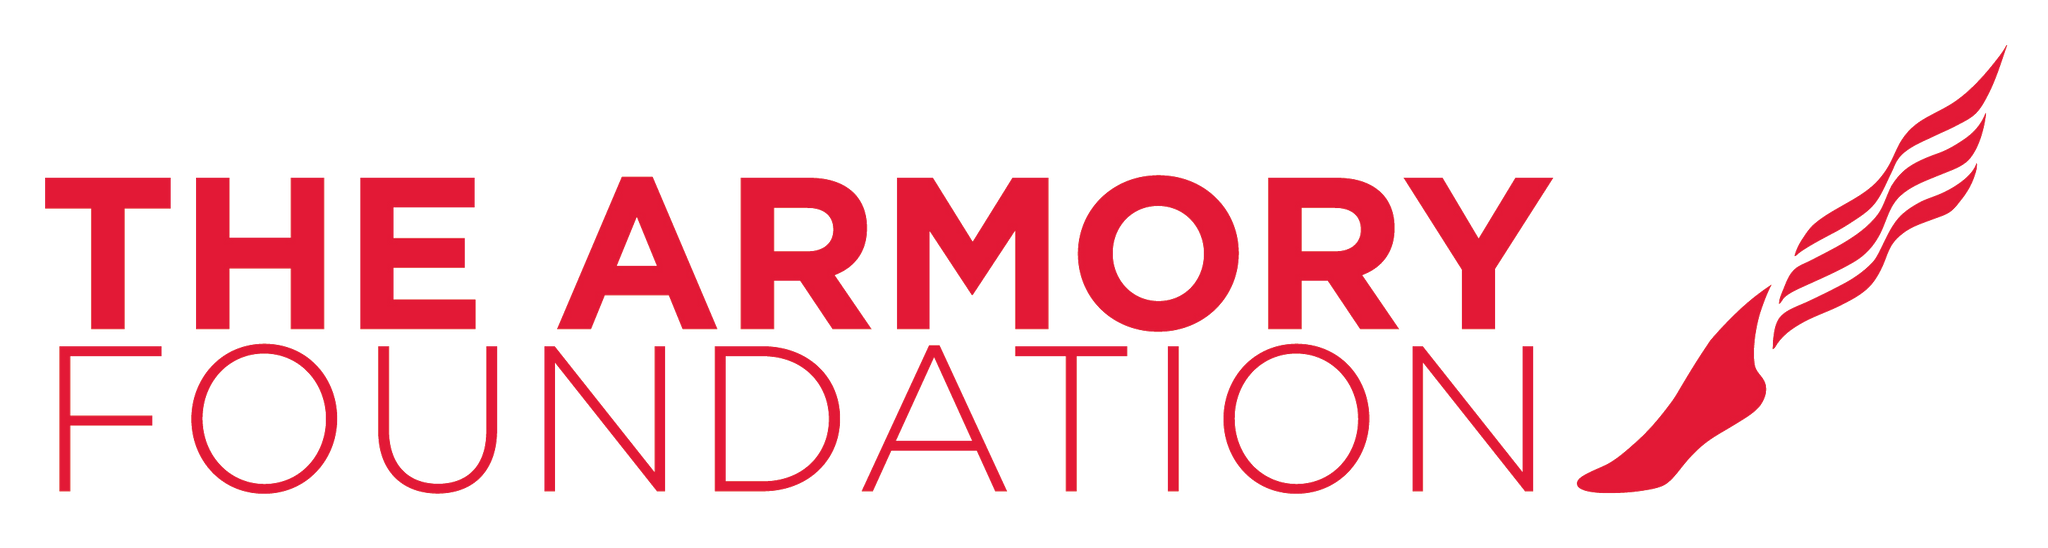 Red text that reads The Armory Foundation in two lines stacked beside an icon of a foot with wavy lines extending out of the heel